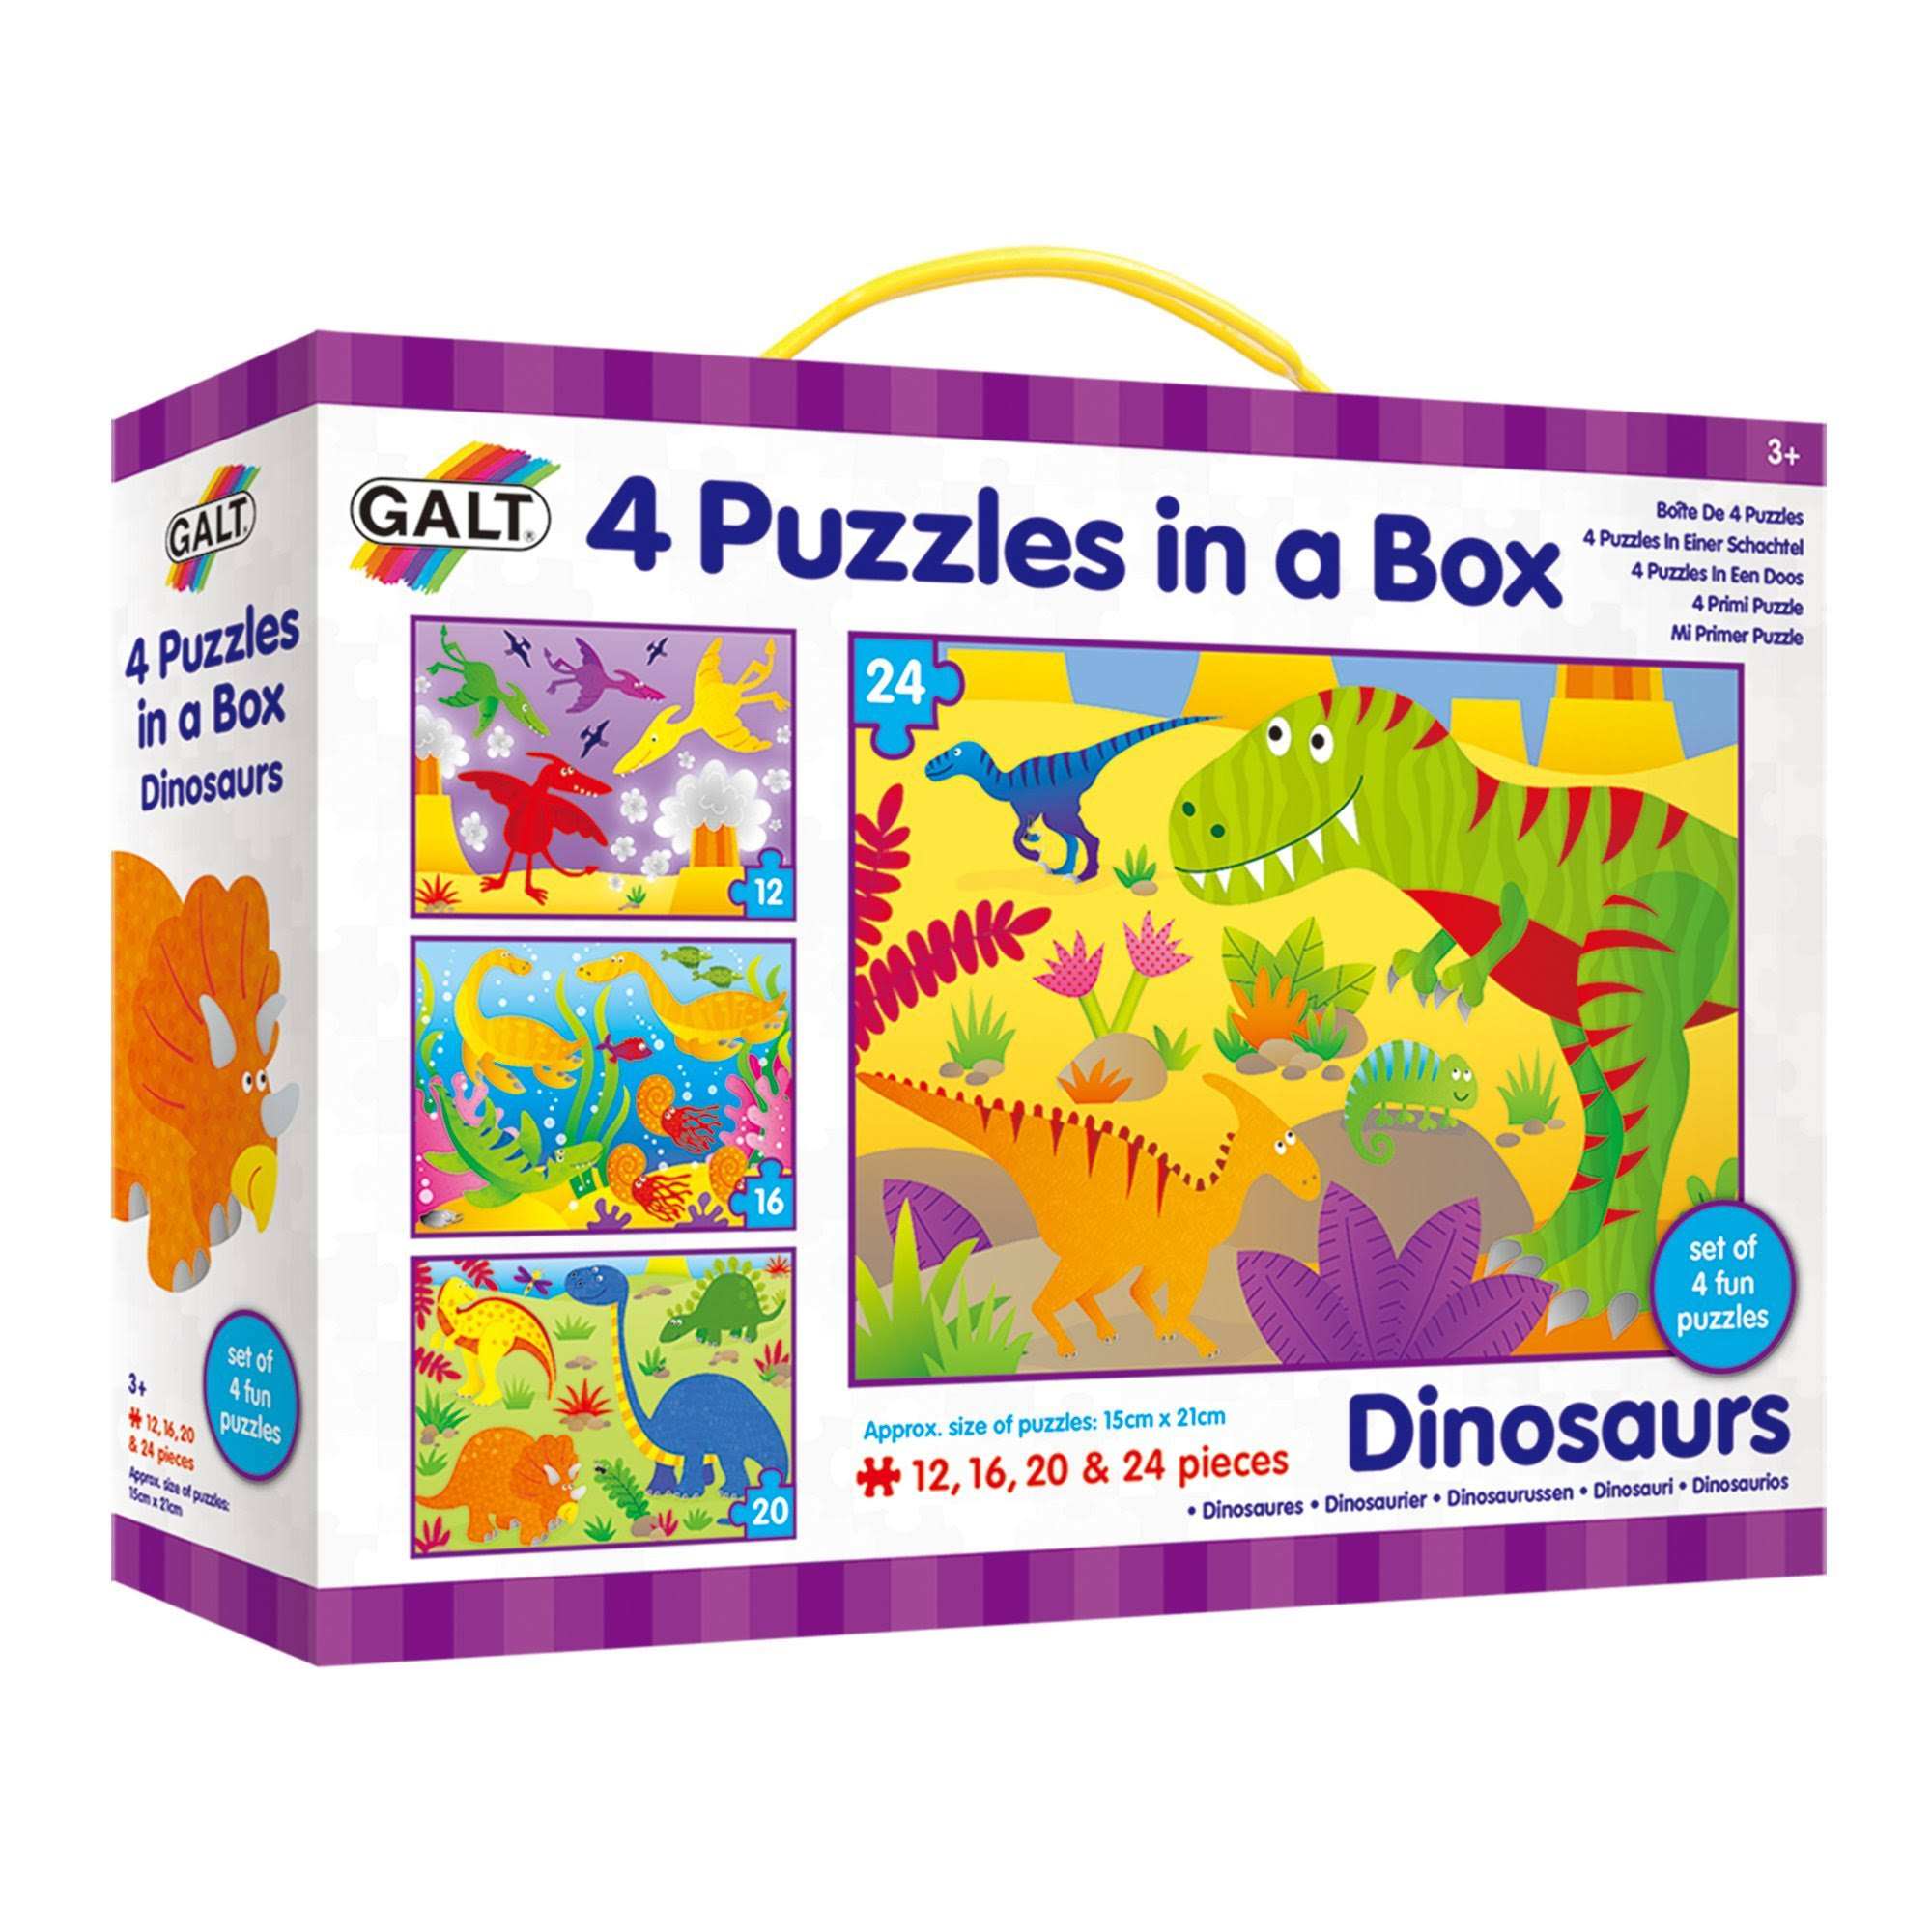 Galt 4 Puzzles in a Box Dinosaurs